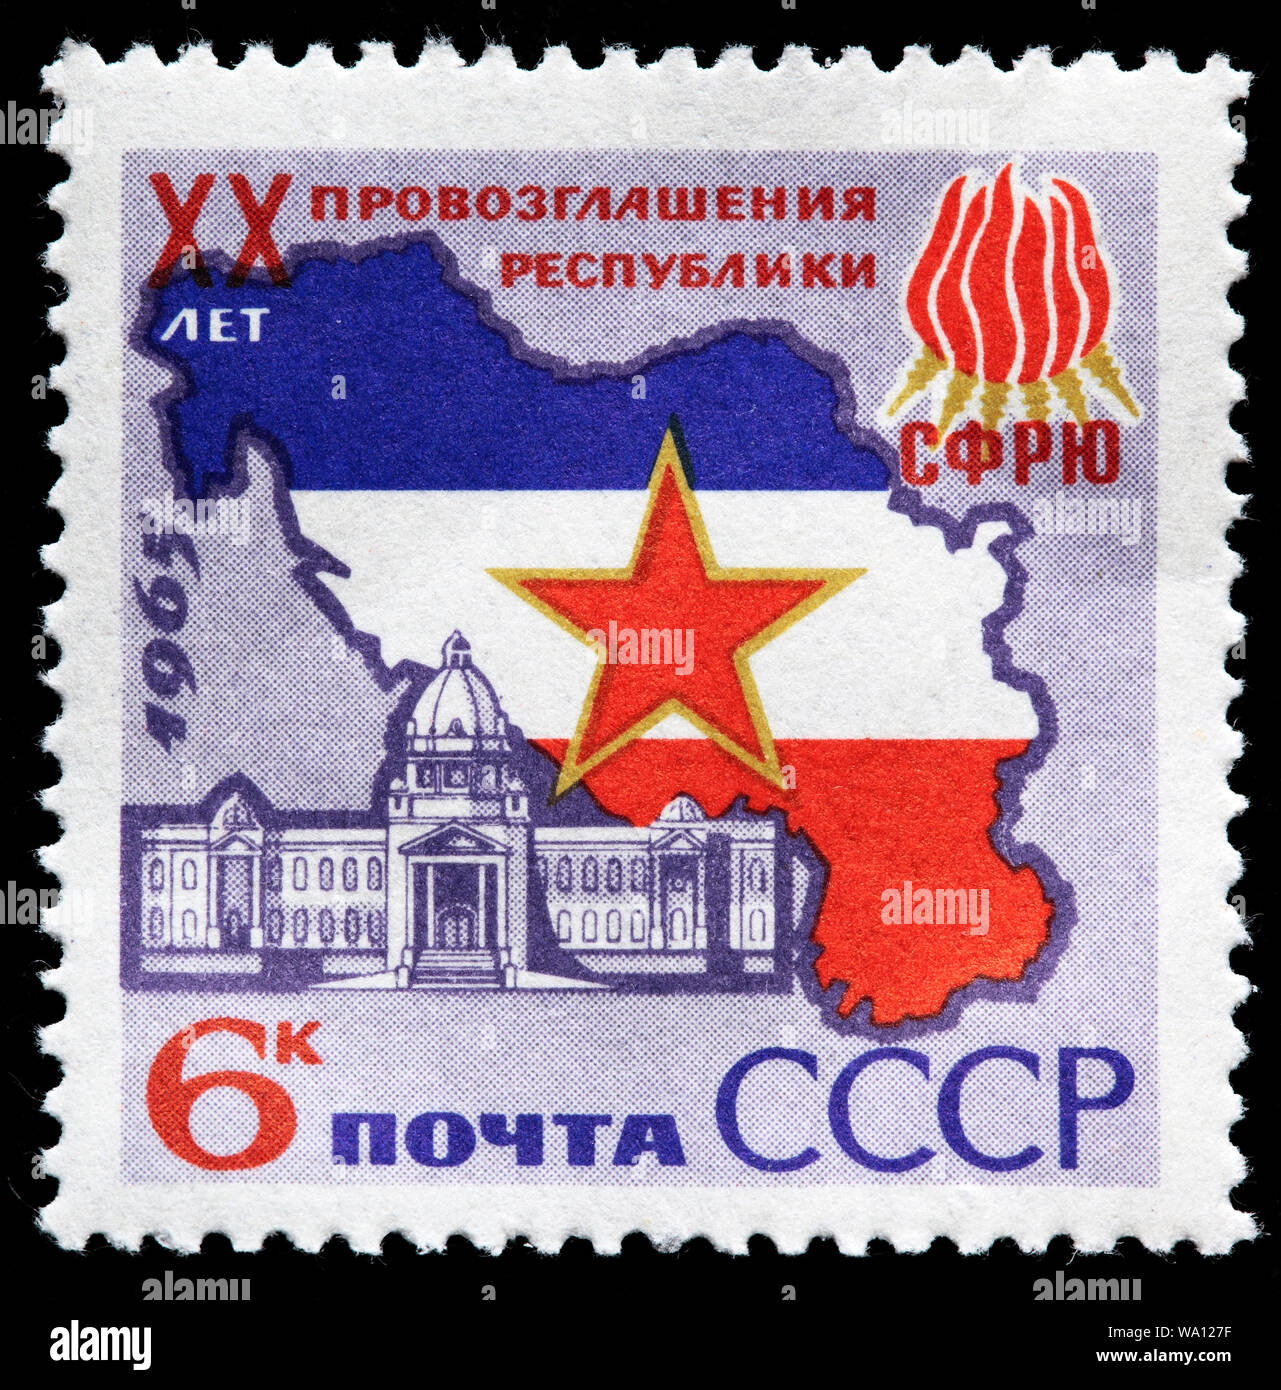 20th Anniversary of Yugoslavia, Flag, Map, Parliament Building, Belgrade, postage stamp, Russia, USSR, 1965 Stock Photo